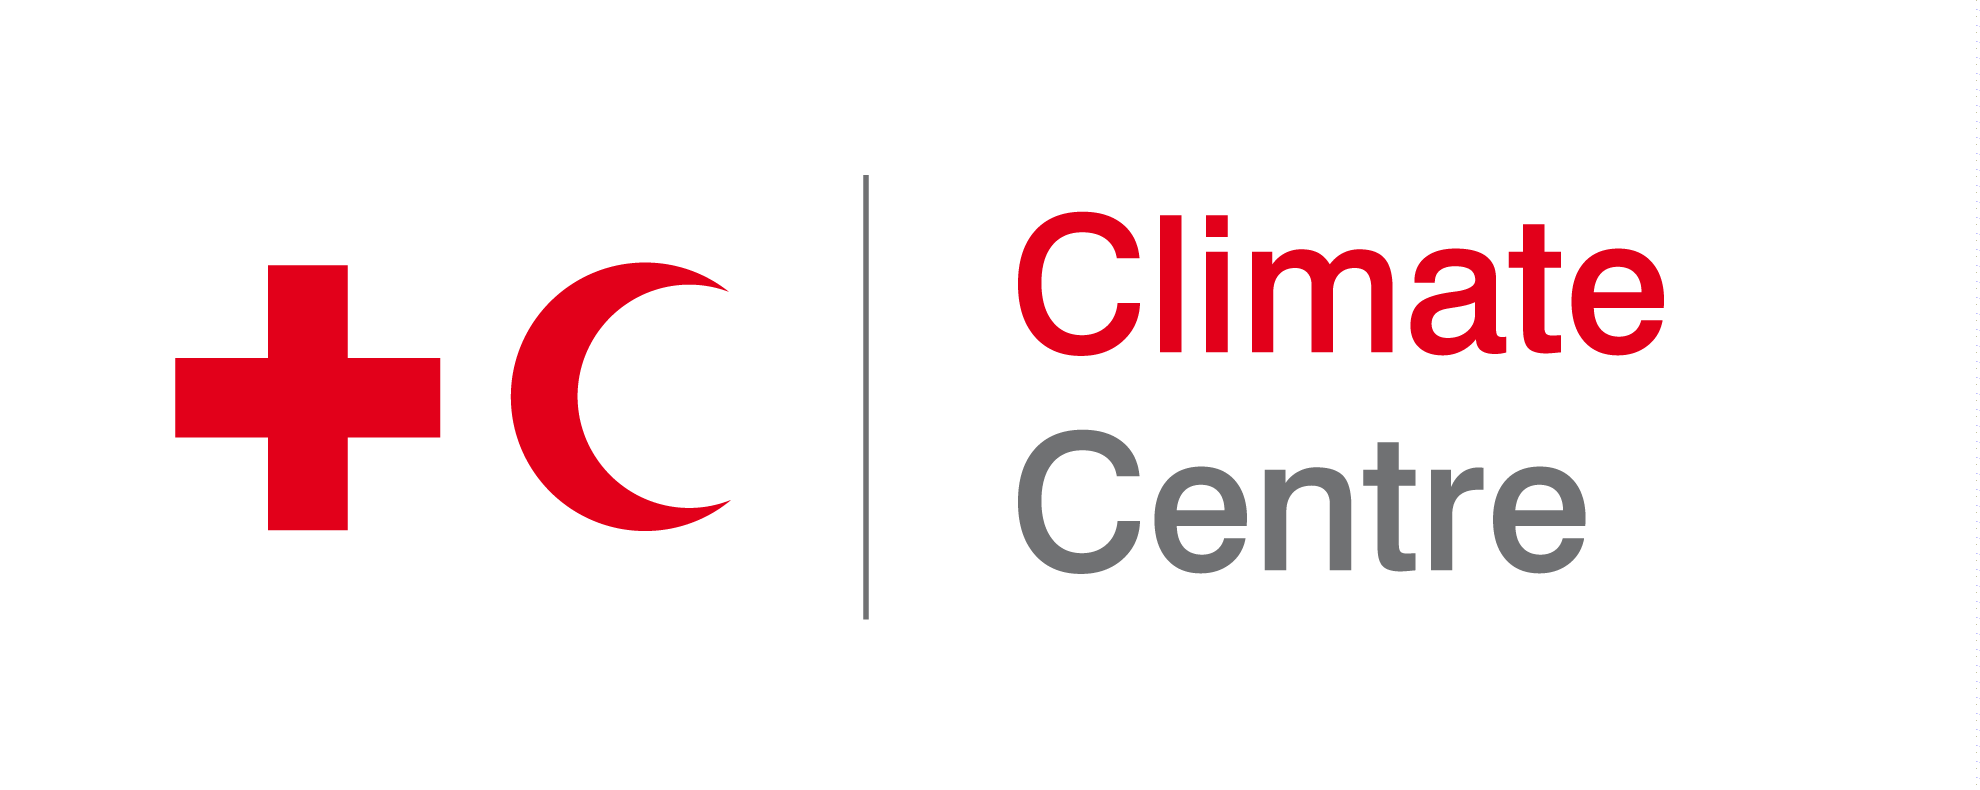 climate-centre-logo-vect-rgb-for-web.png